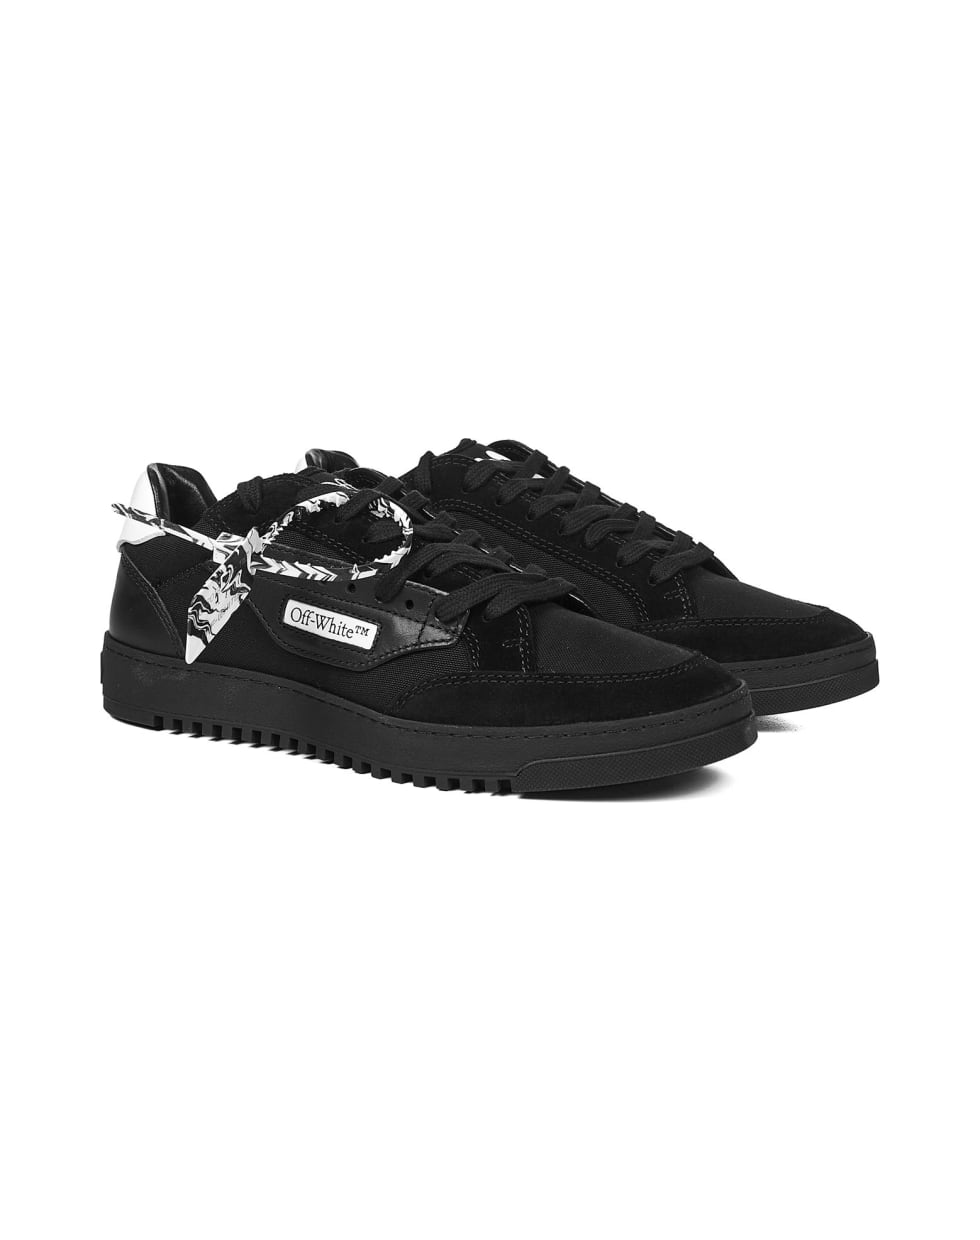 Off-White 5.0 Sneakers - Black